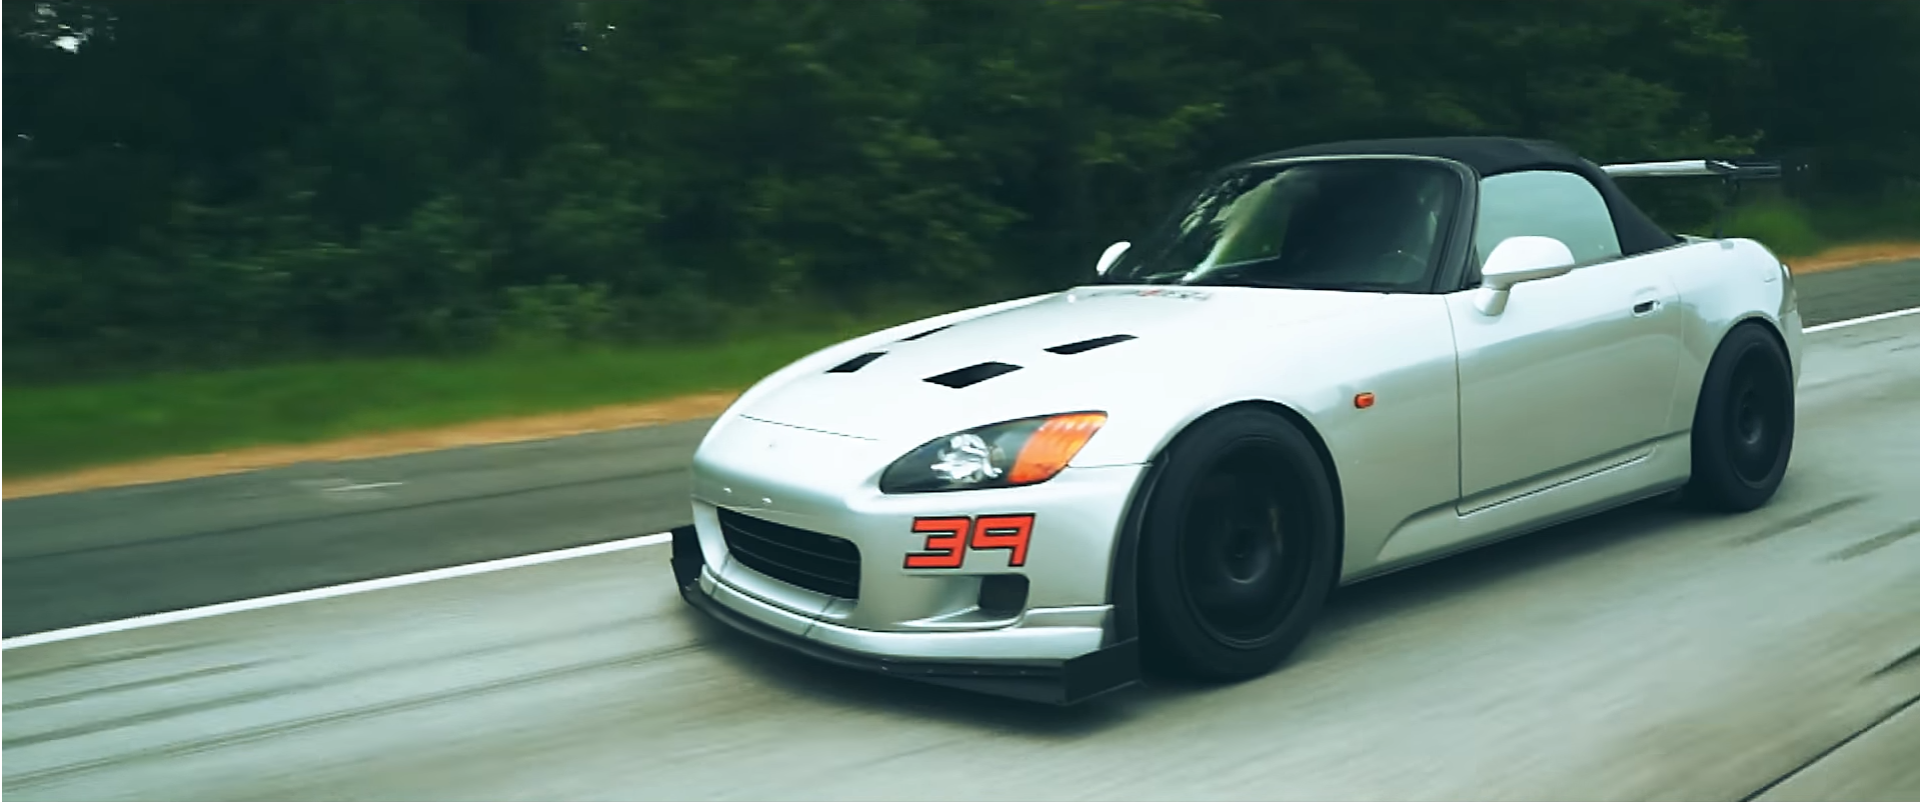 Why Now Is The Time To Buy A Honda S2000